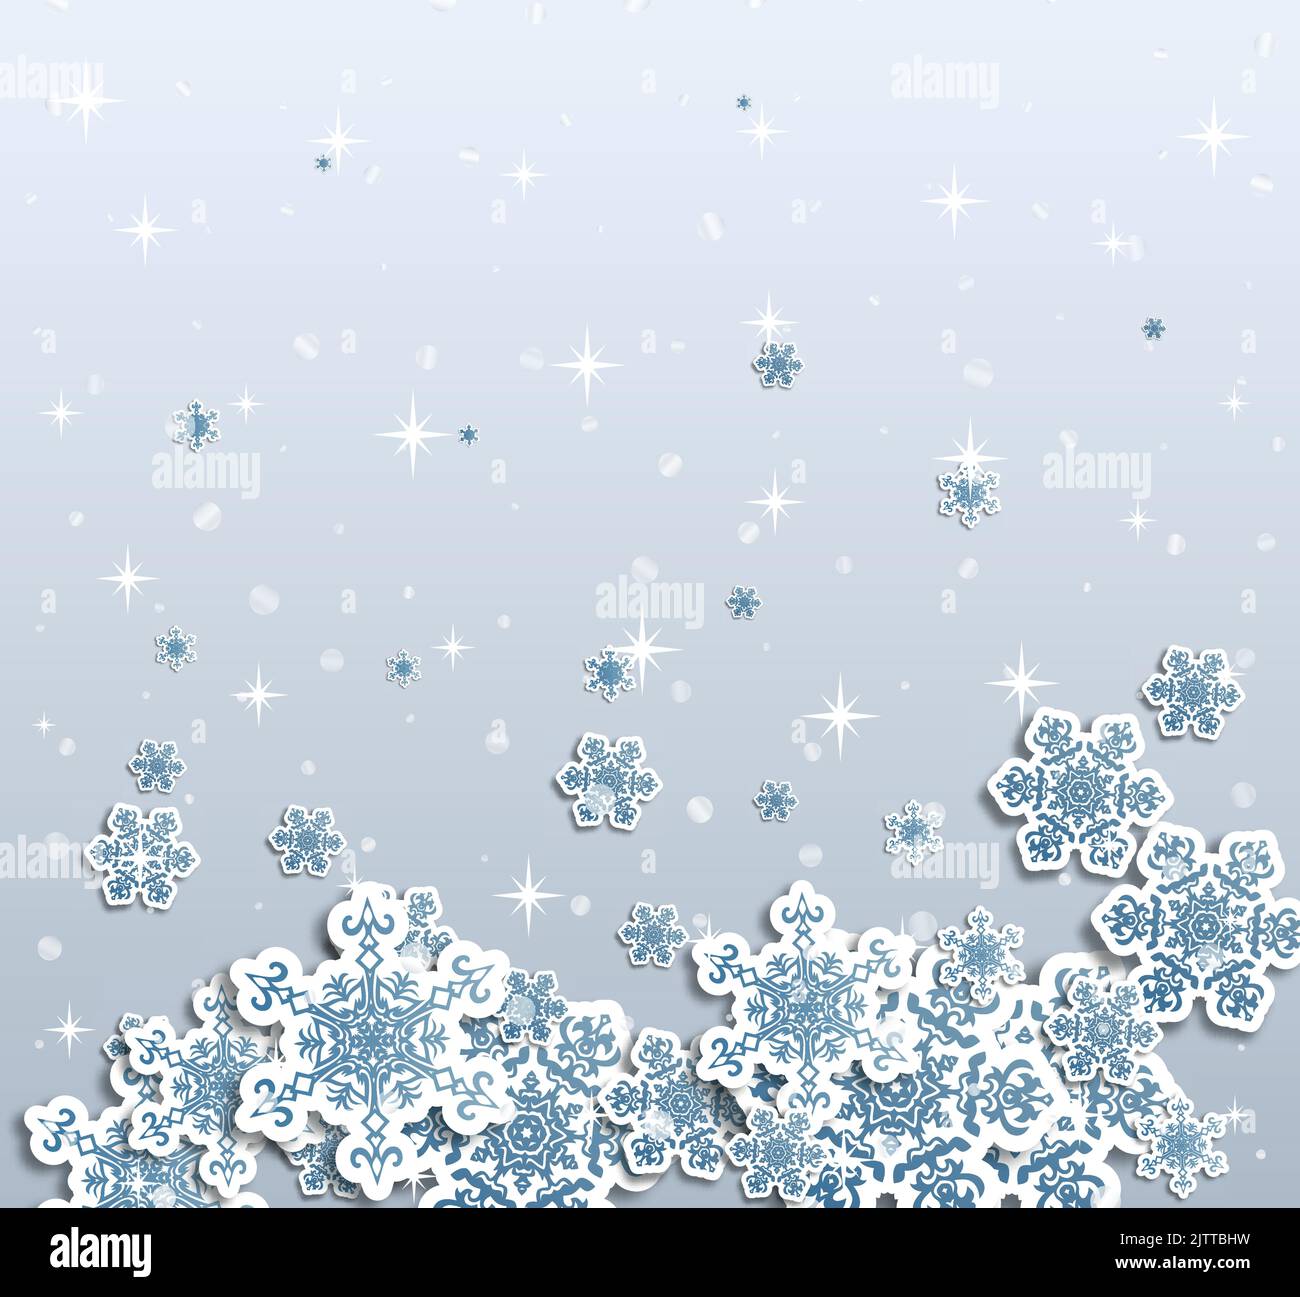 Christmas greeting card with type design and decorations on the snowy blue background. Vector illustration. Stock Vector